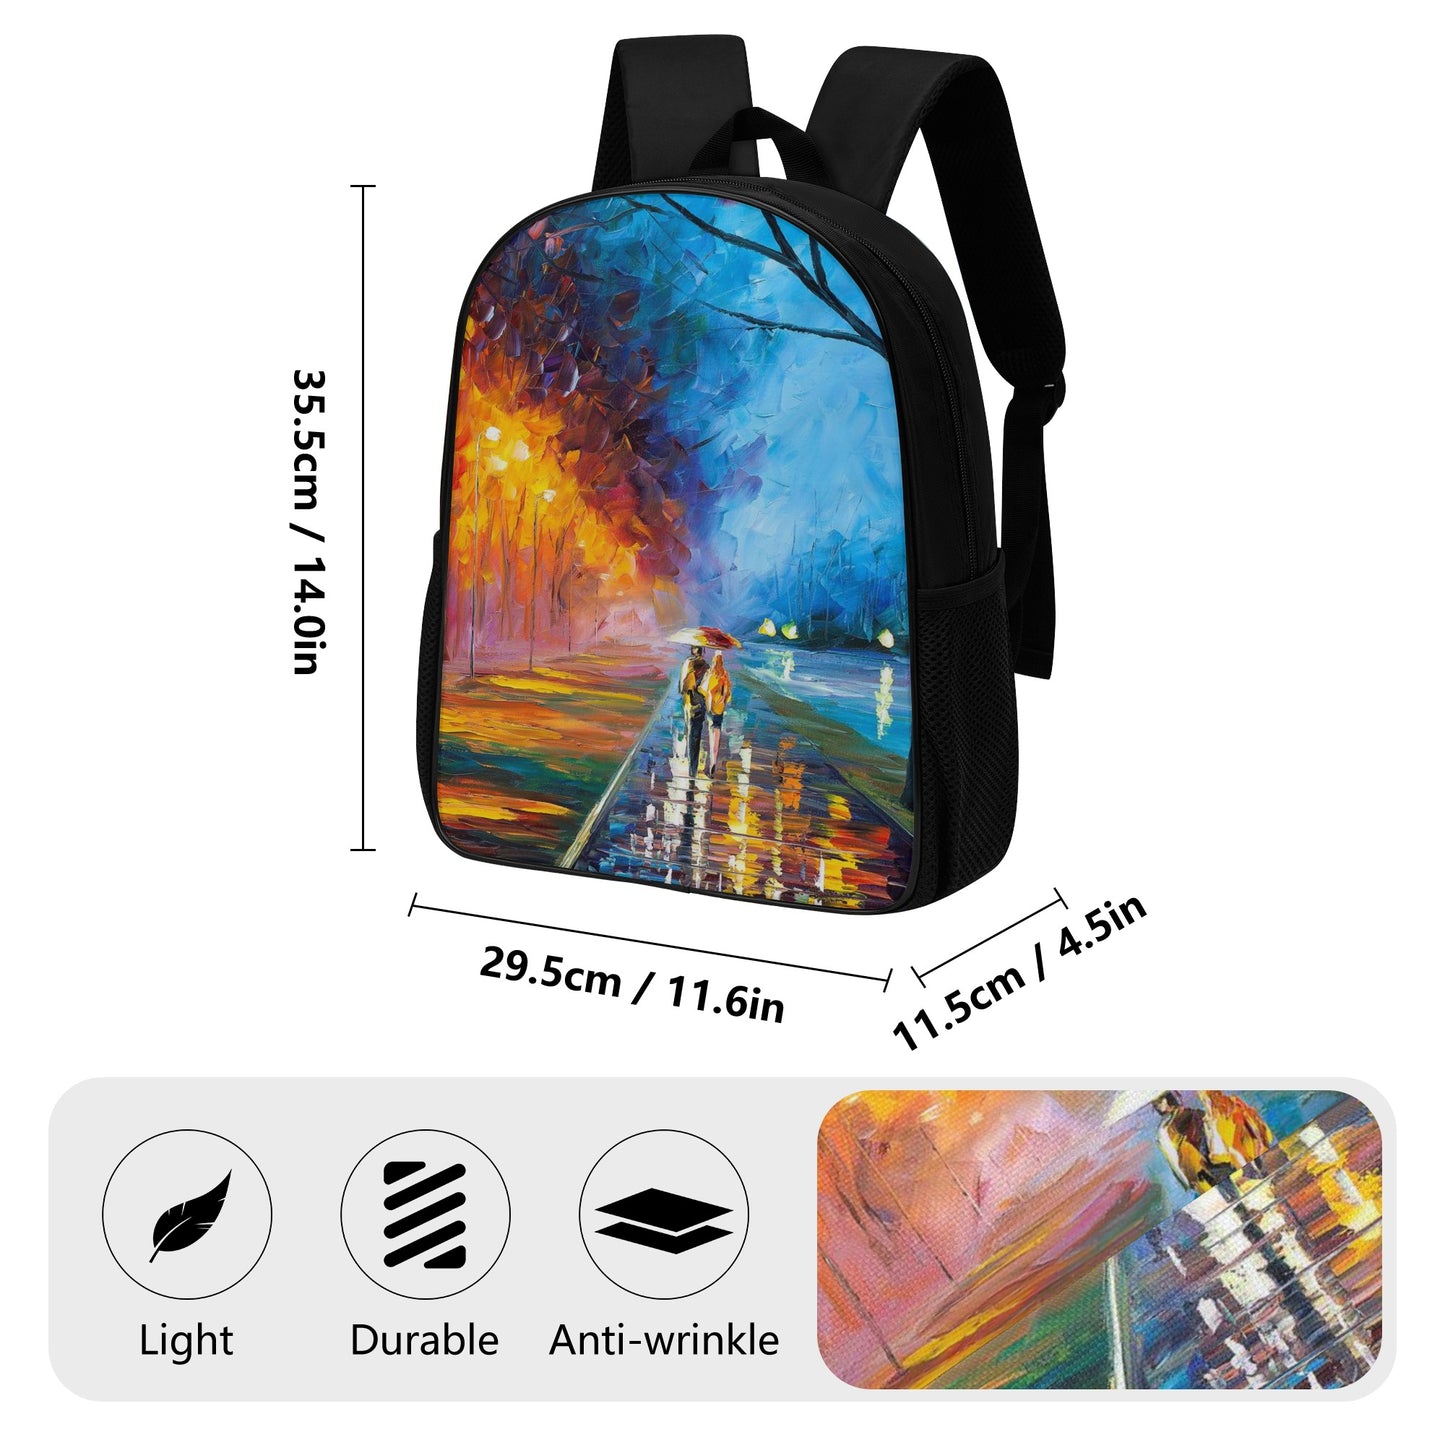 14 Inch Nylon Backpack Afremov ALLEY BY THE LAKE